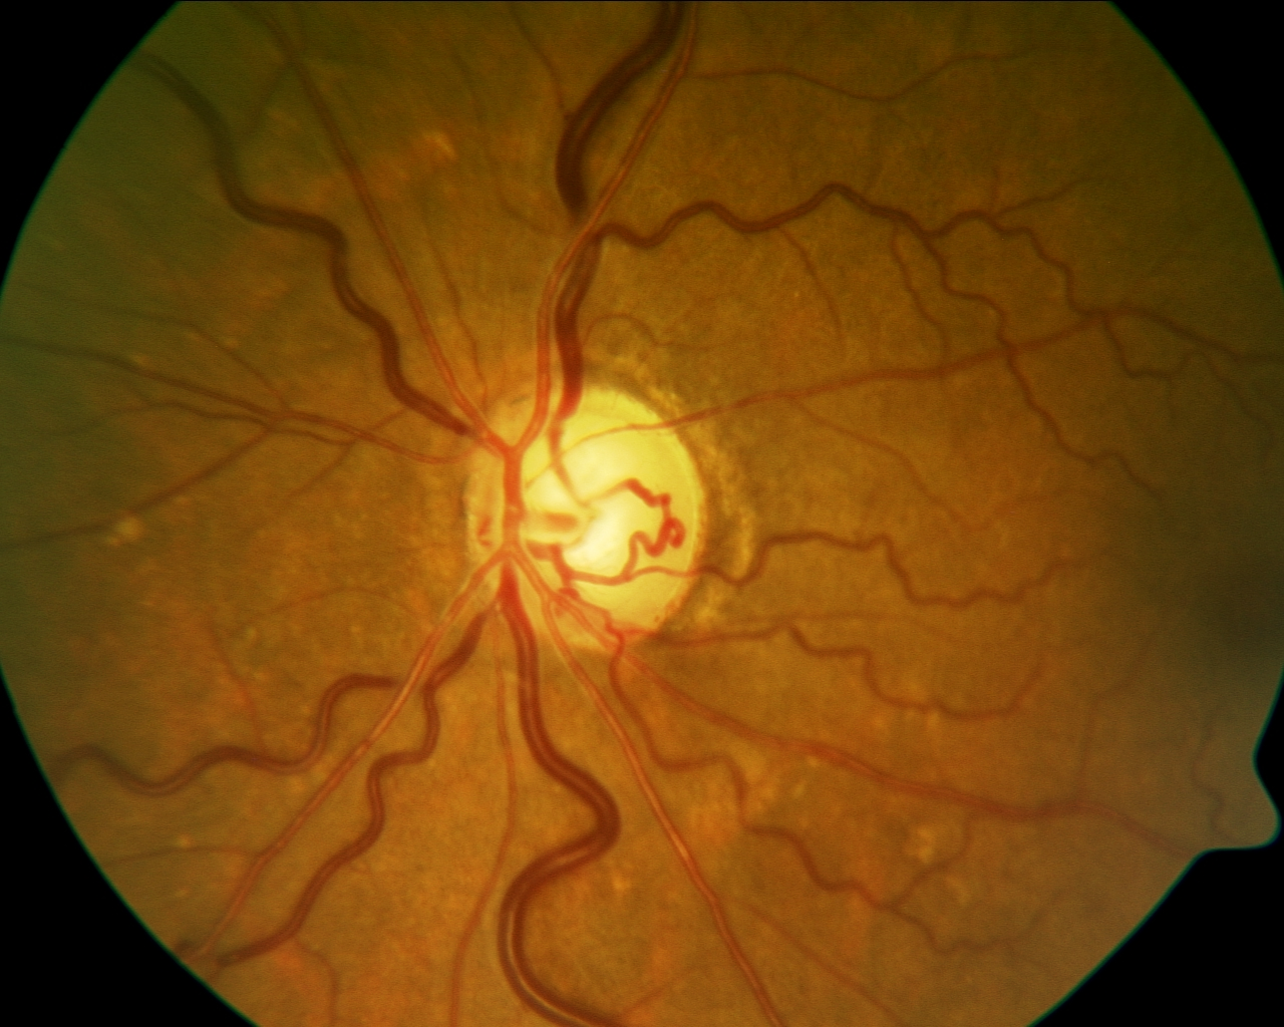 KMK Optometry Pro on Instagram: “At first glance, this optic nerve may  appear normal. However, this is a case of double ring sign seen in a  patient with optic n…